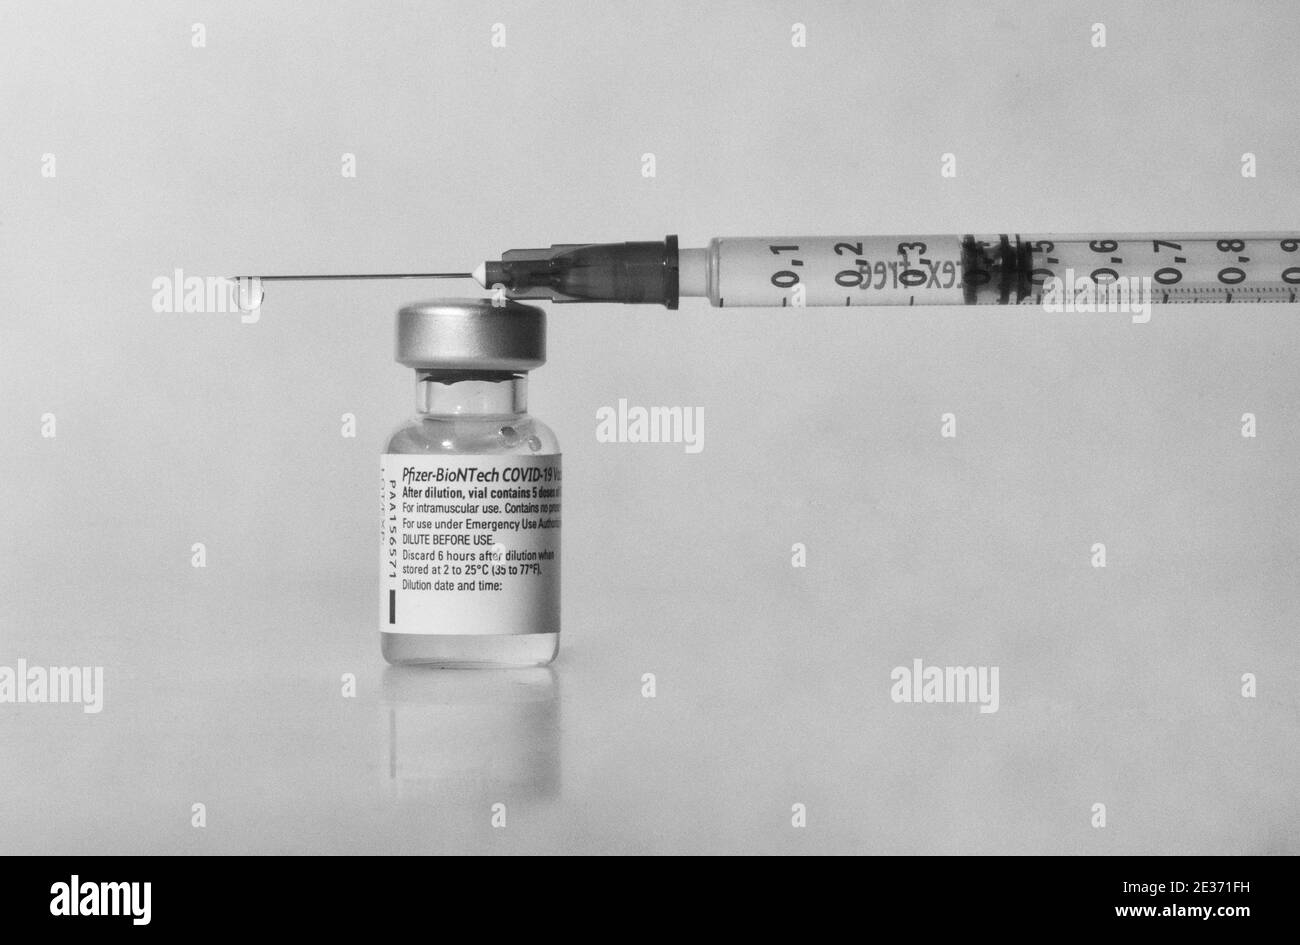 Vaccine vial against Covid 19 and syringe with drops, Biontech, Pfizer, Pfizer-BioNTech Stock Photo